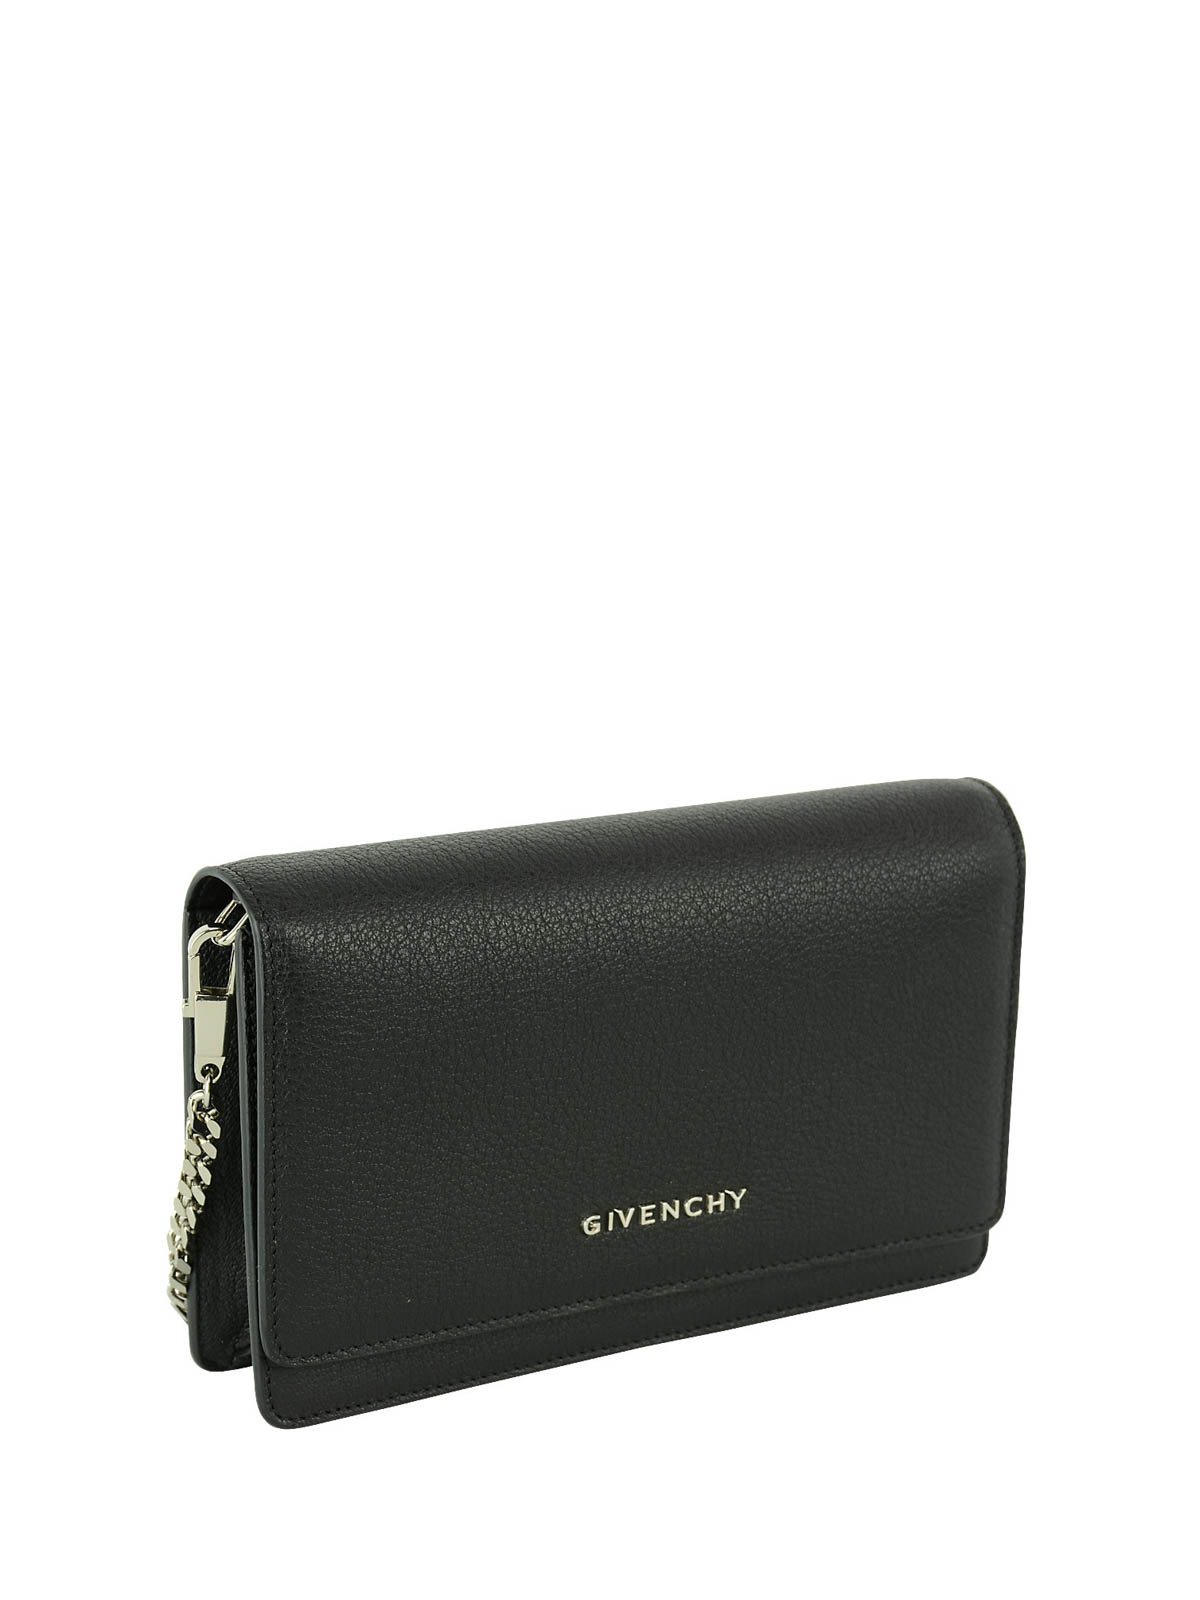 Givenchy - Pandora wallet with chain 